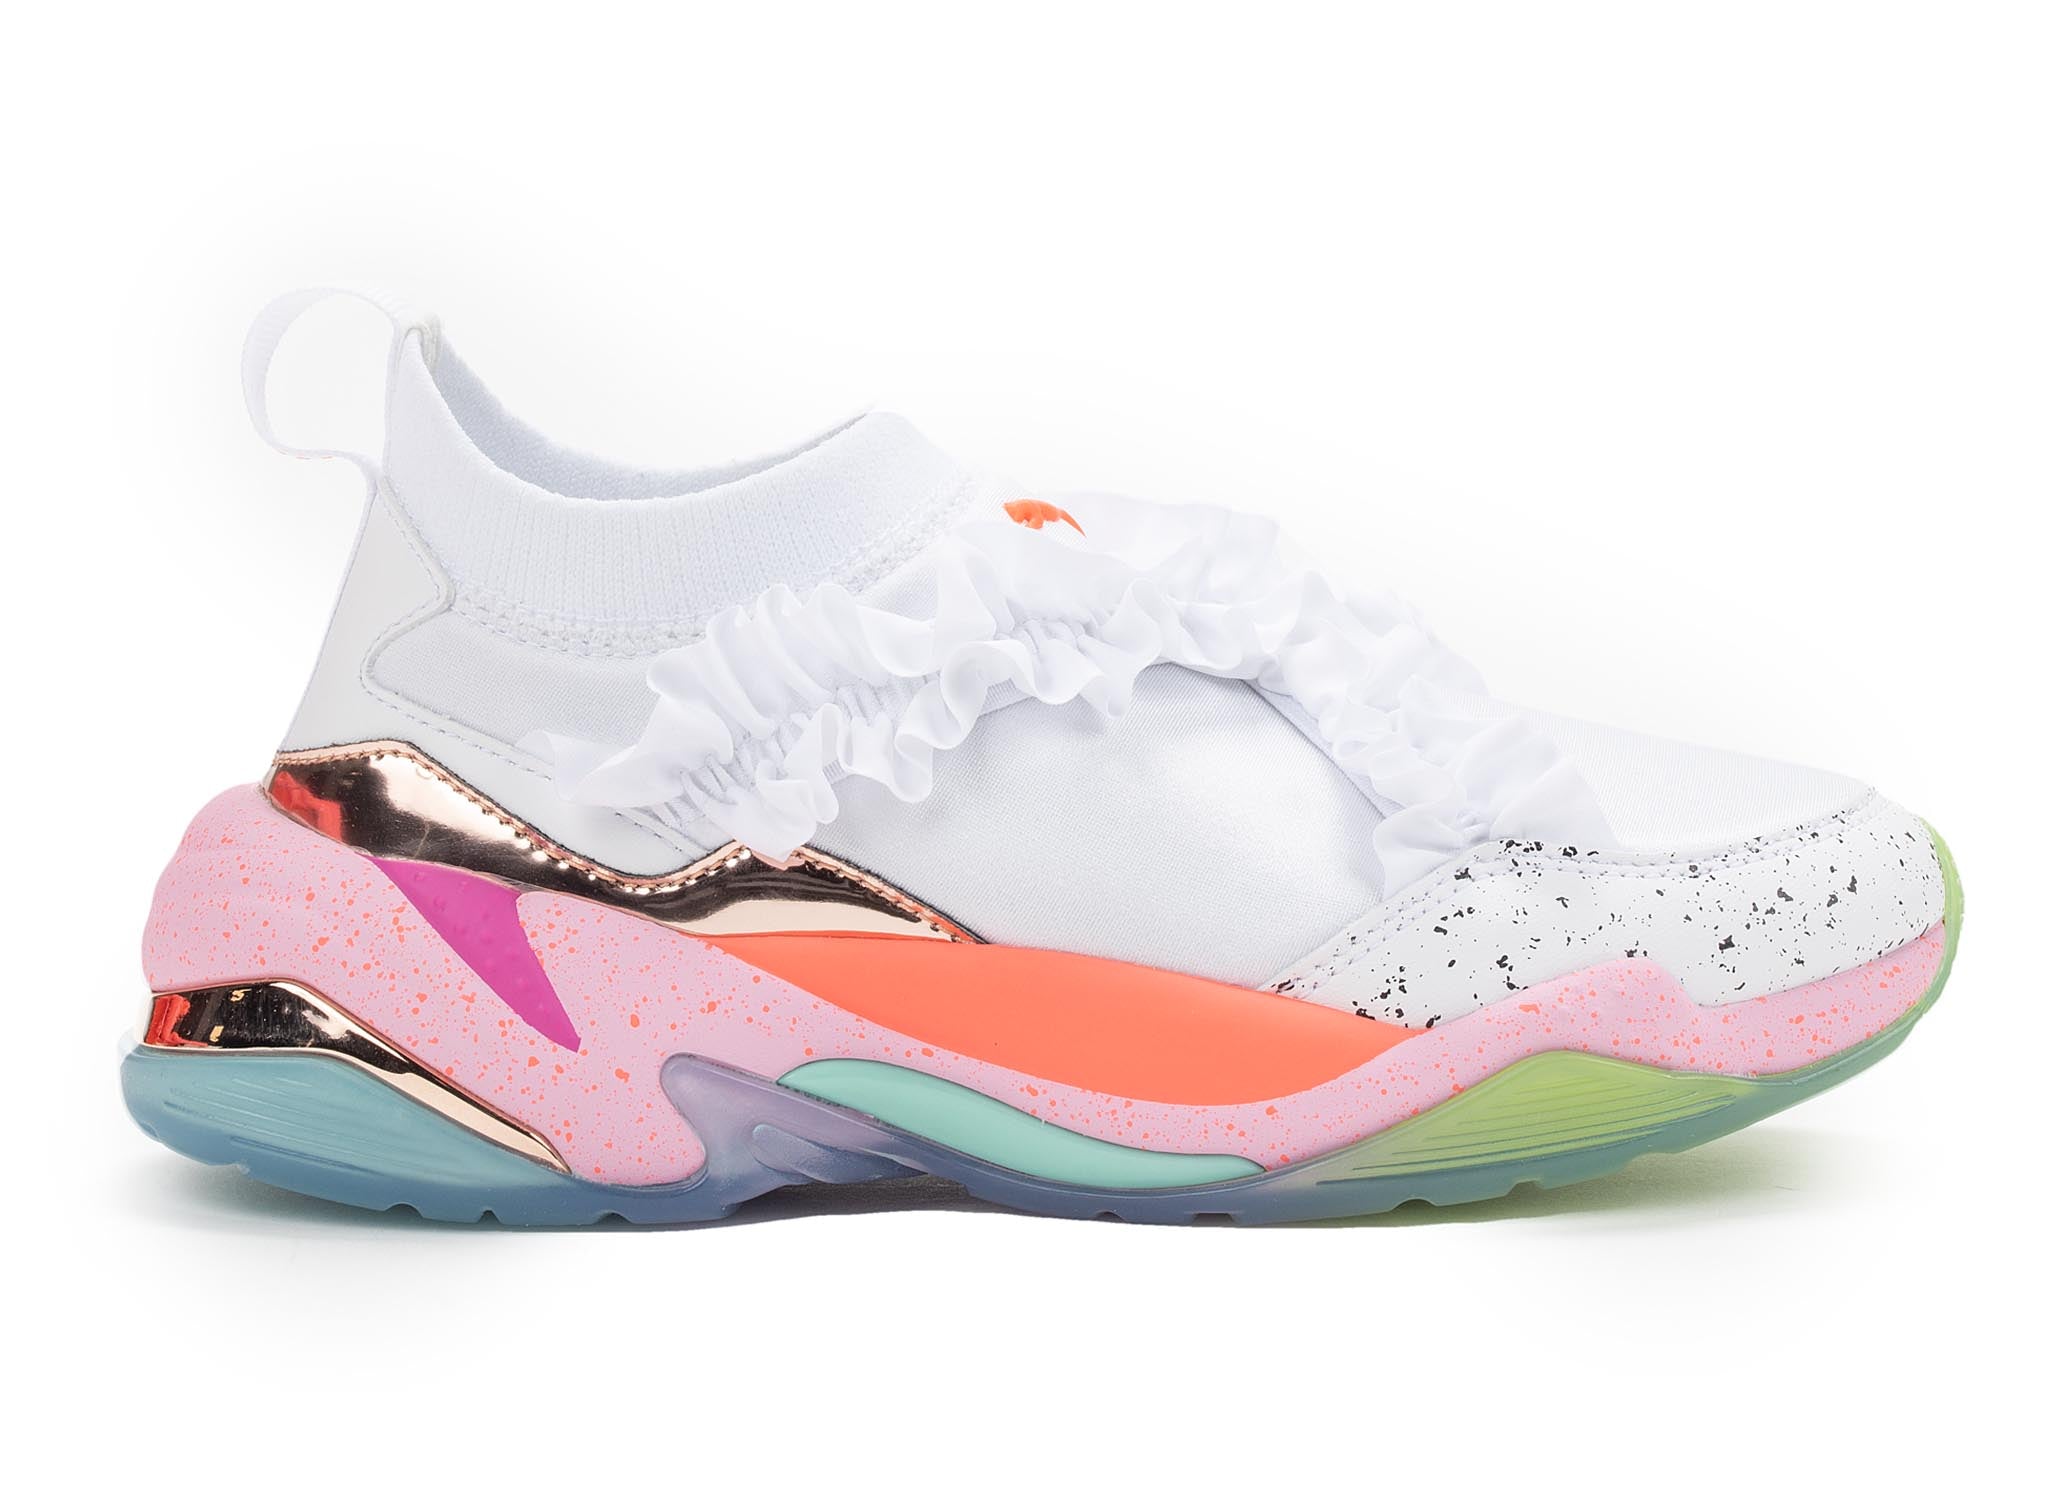 WOMENS PUMA thunder Sophia Webster - Oneness Boutique